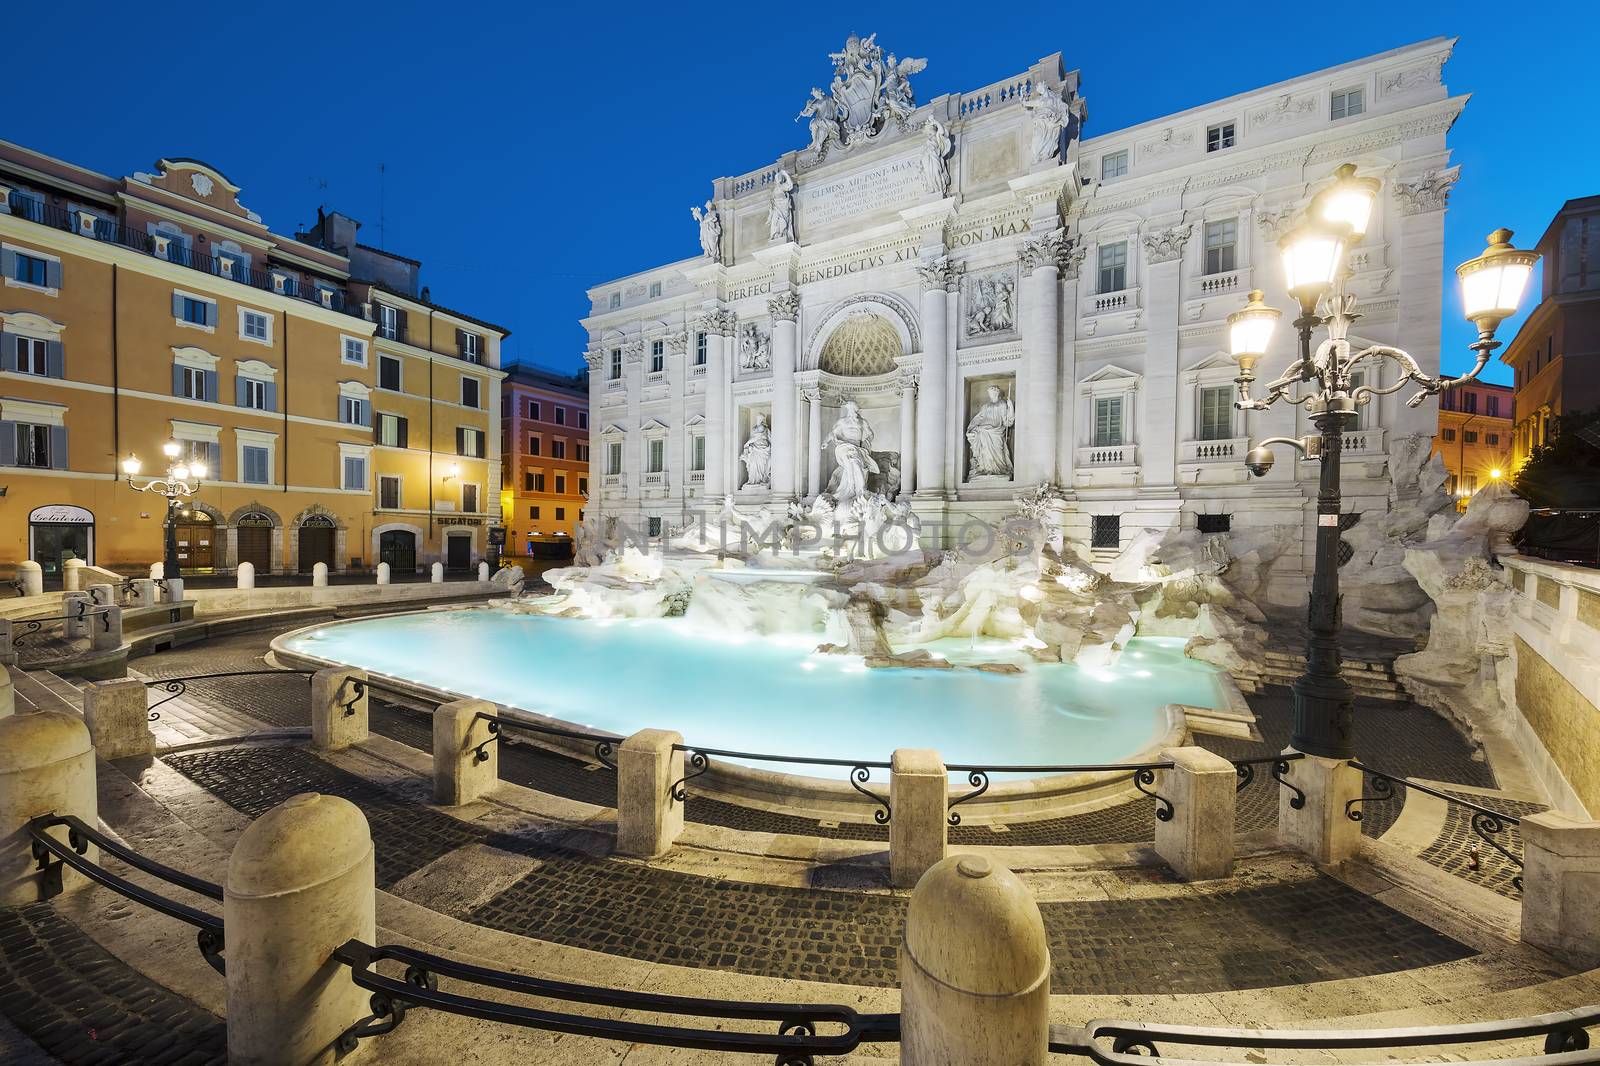 Trevi fountain by night by vwalakte